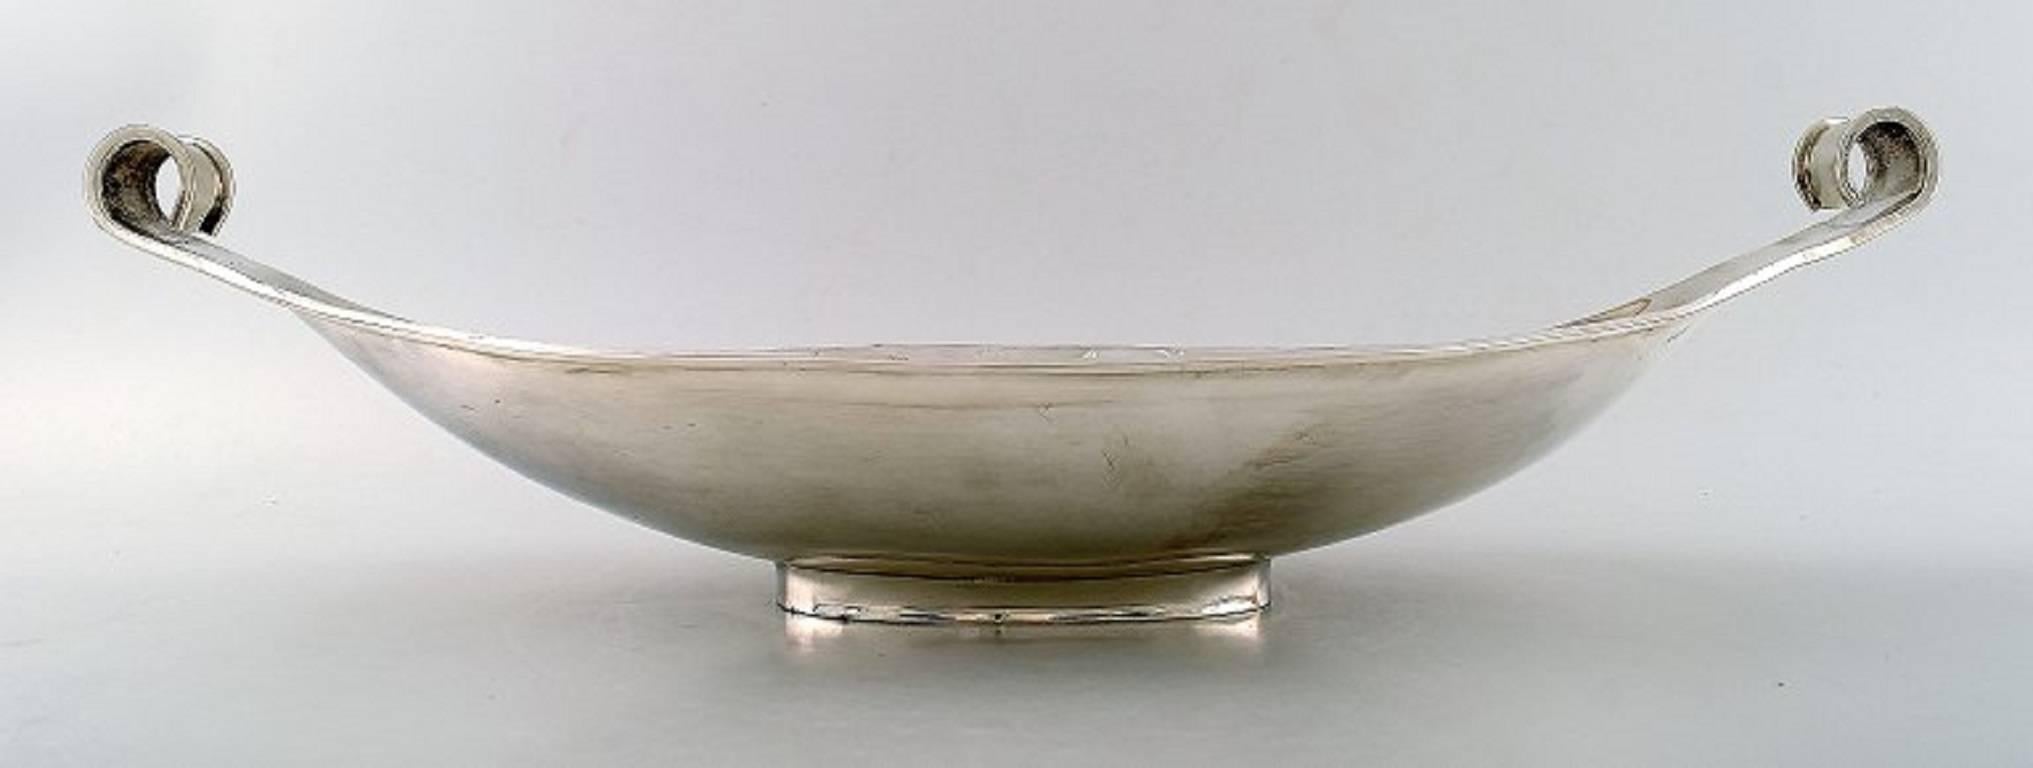 Large Art Deco centrepiece or bowl in sterling silver, 1940s-1950s.

Measures: 45 cm. x 17.5 cm.

Weight: 721 grams.

Signed illegible.

In very good condition.